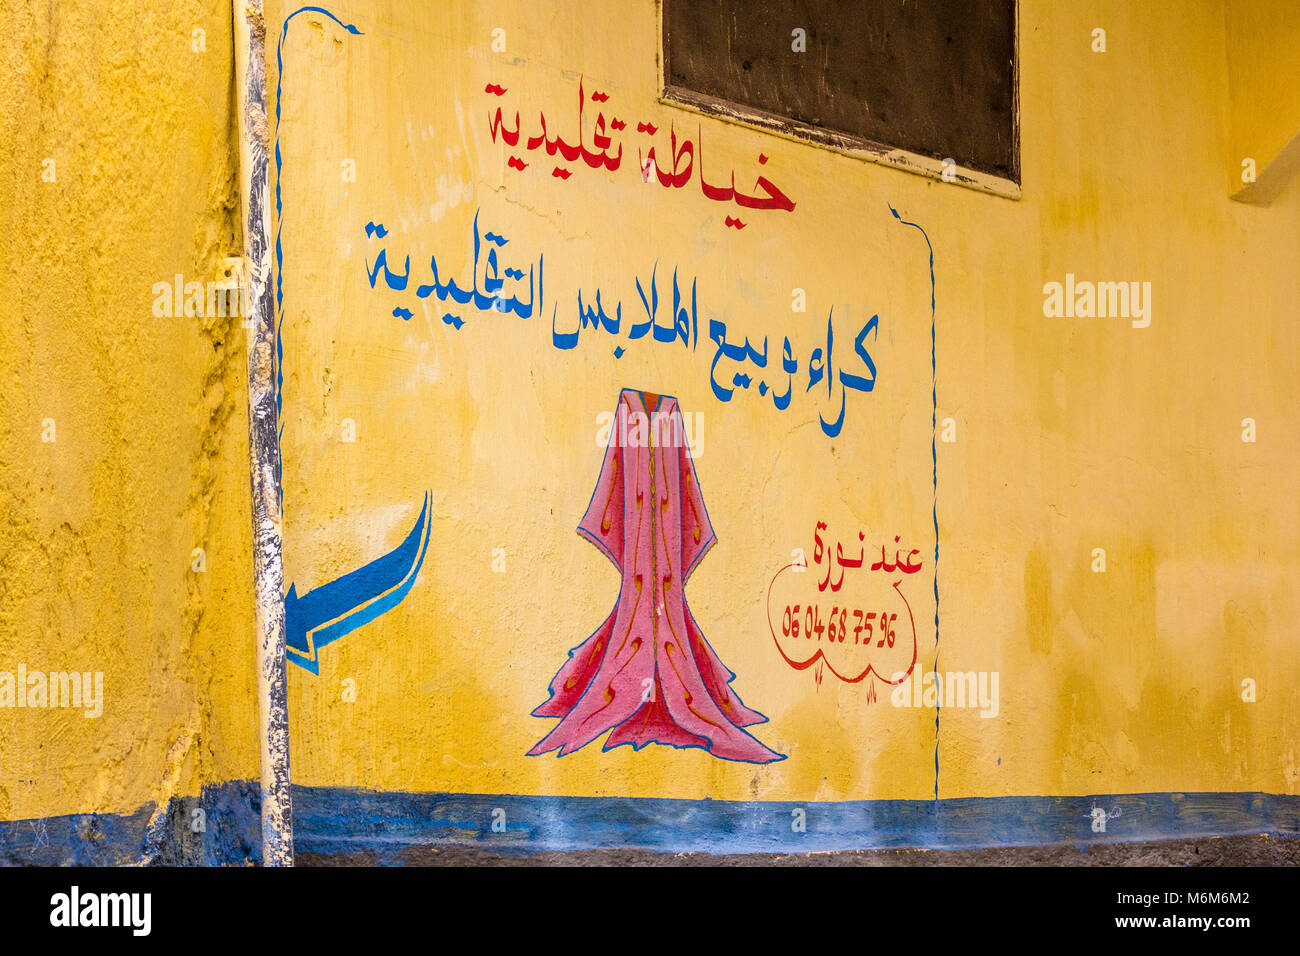 A colourful painted advert on a wall in the Muslim Quarter of Res, Morocco Stock Photo